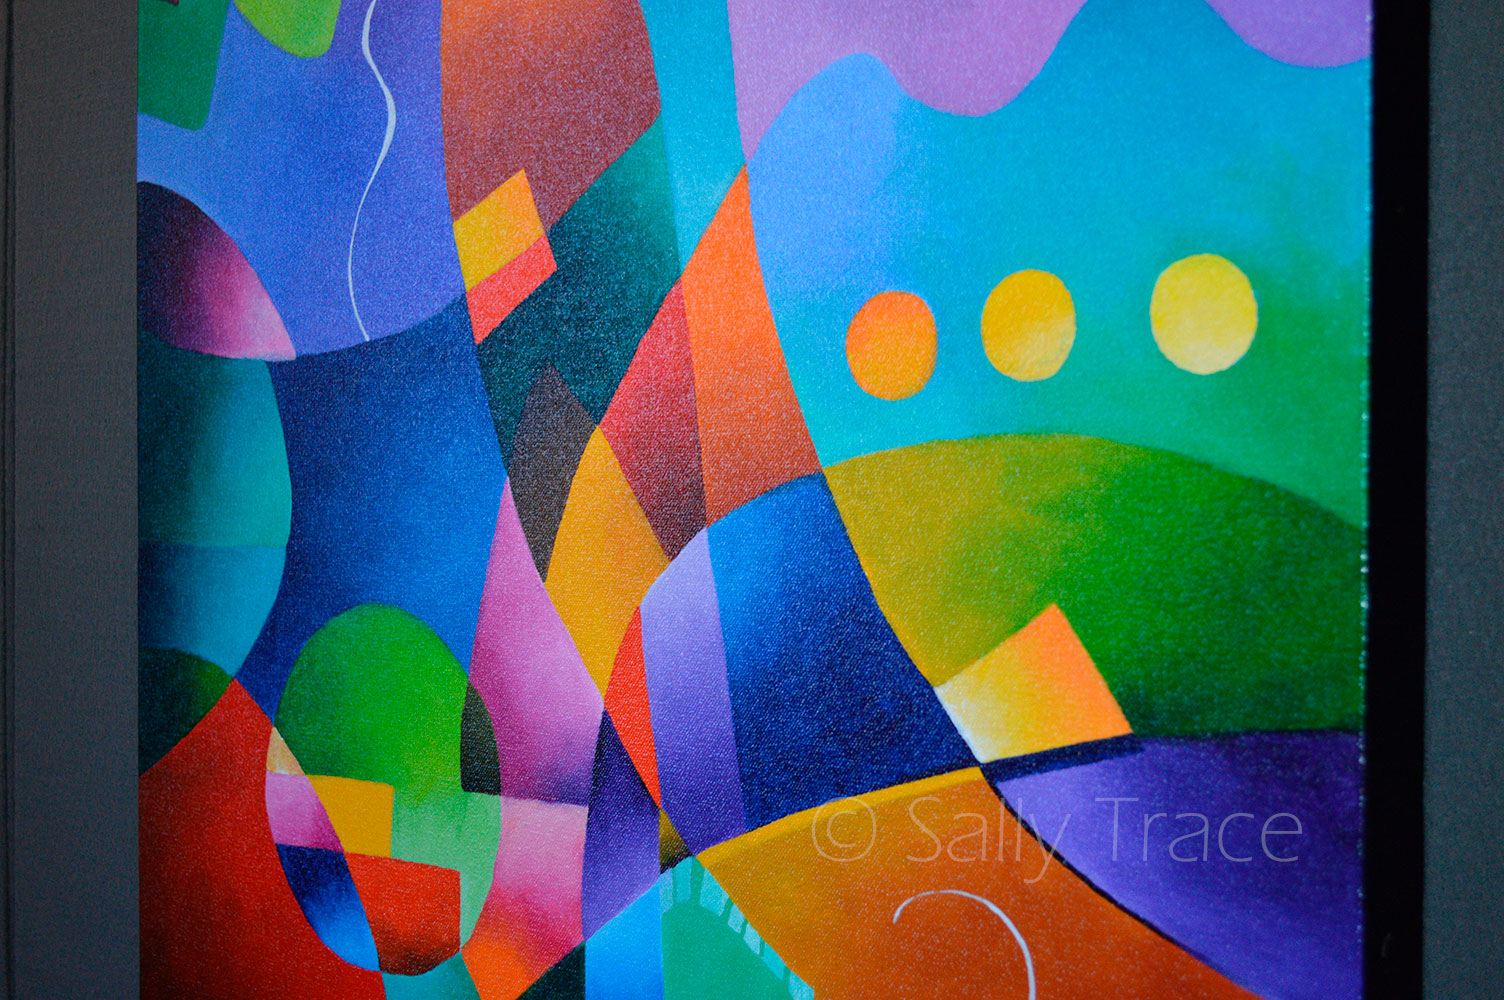 Reveur, Hard-Edge Abstraction Original Colorful Geometric Painting for sale by Sally Trace